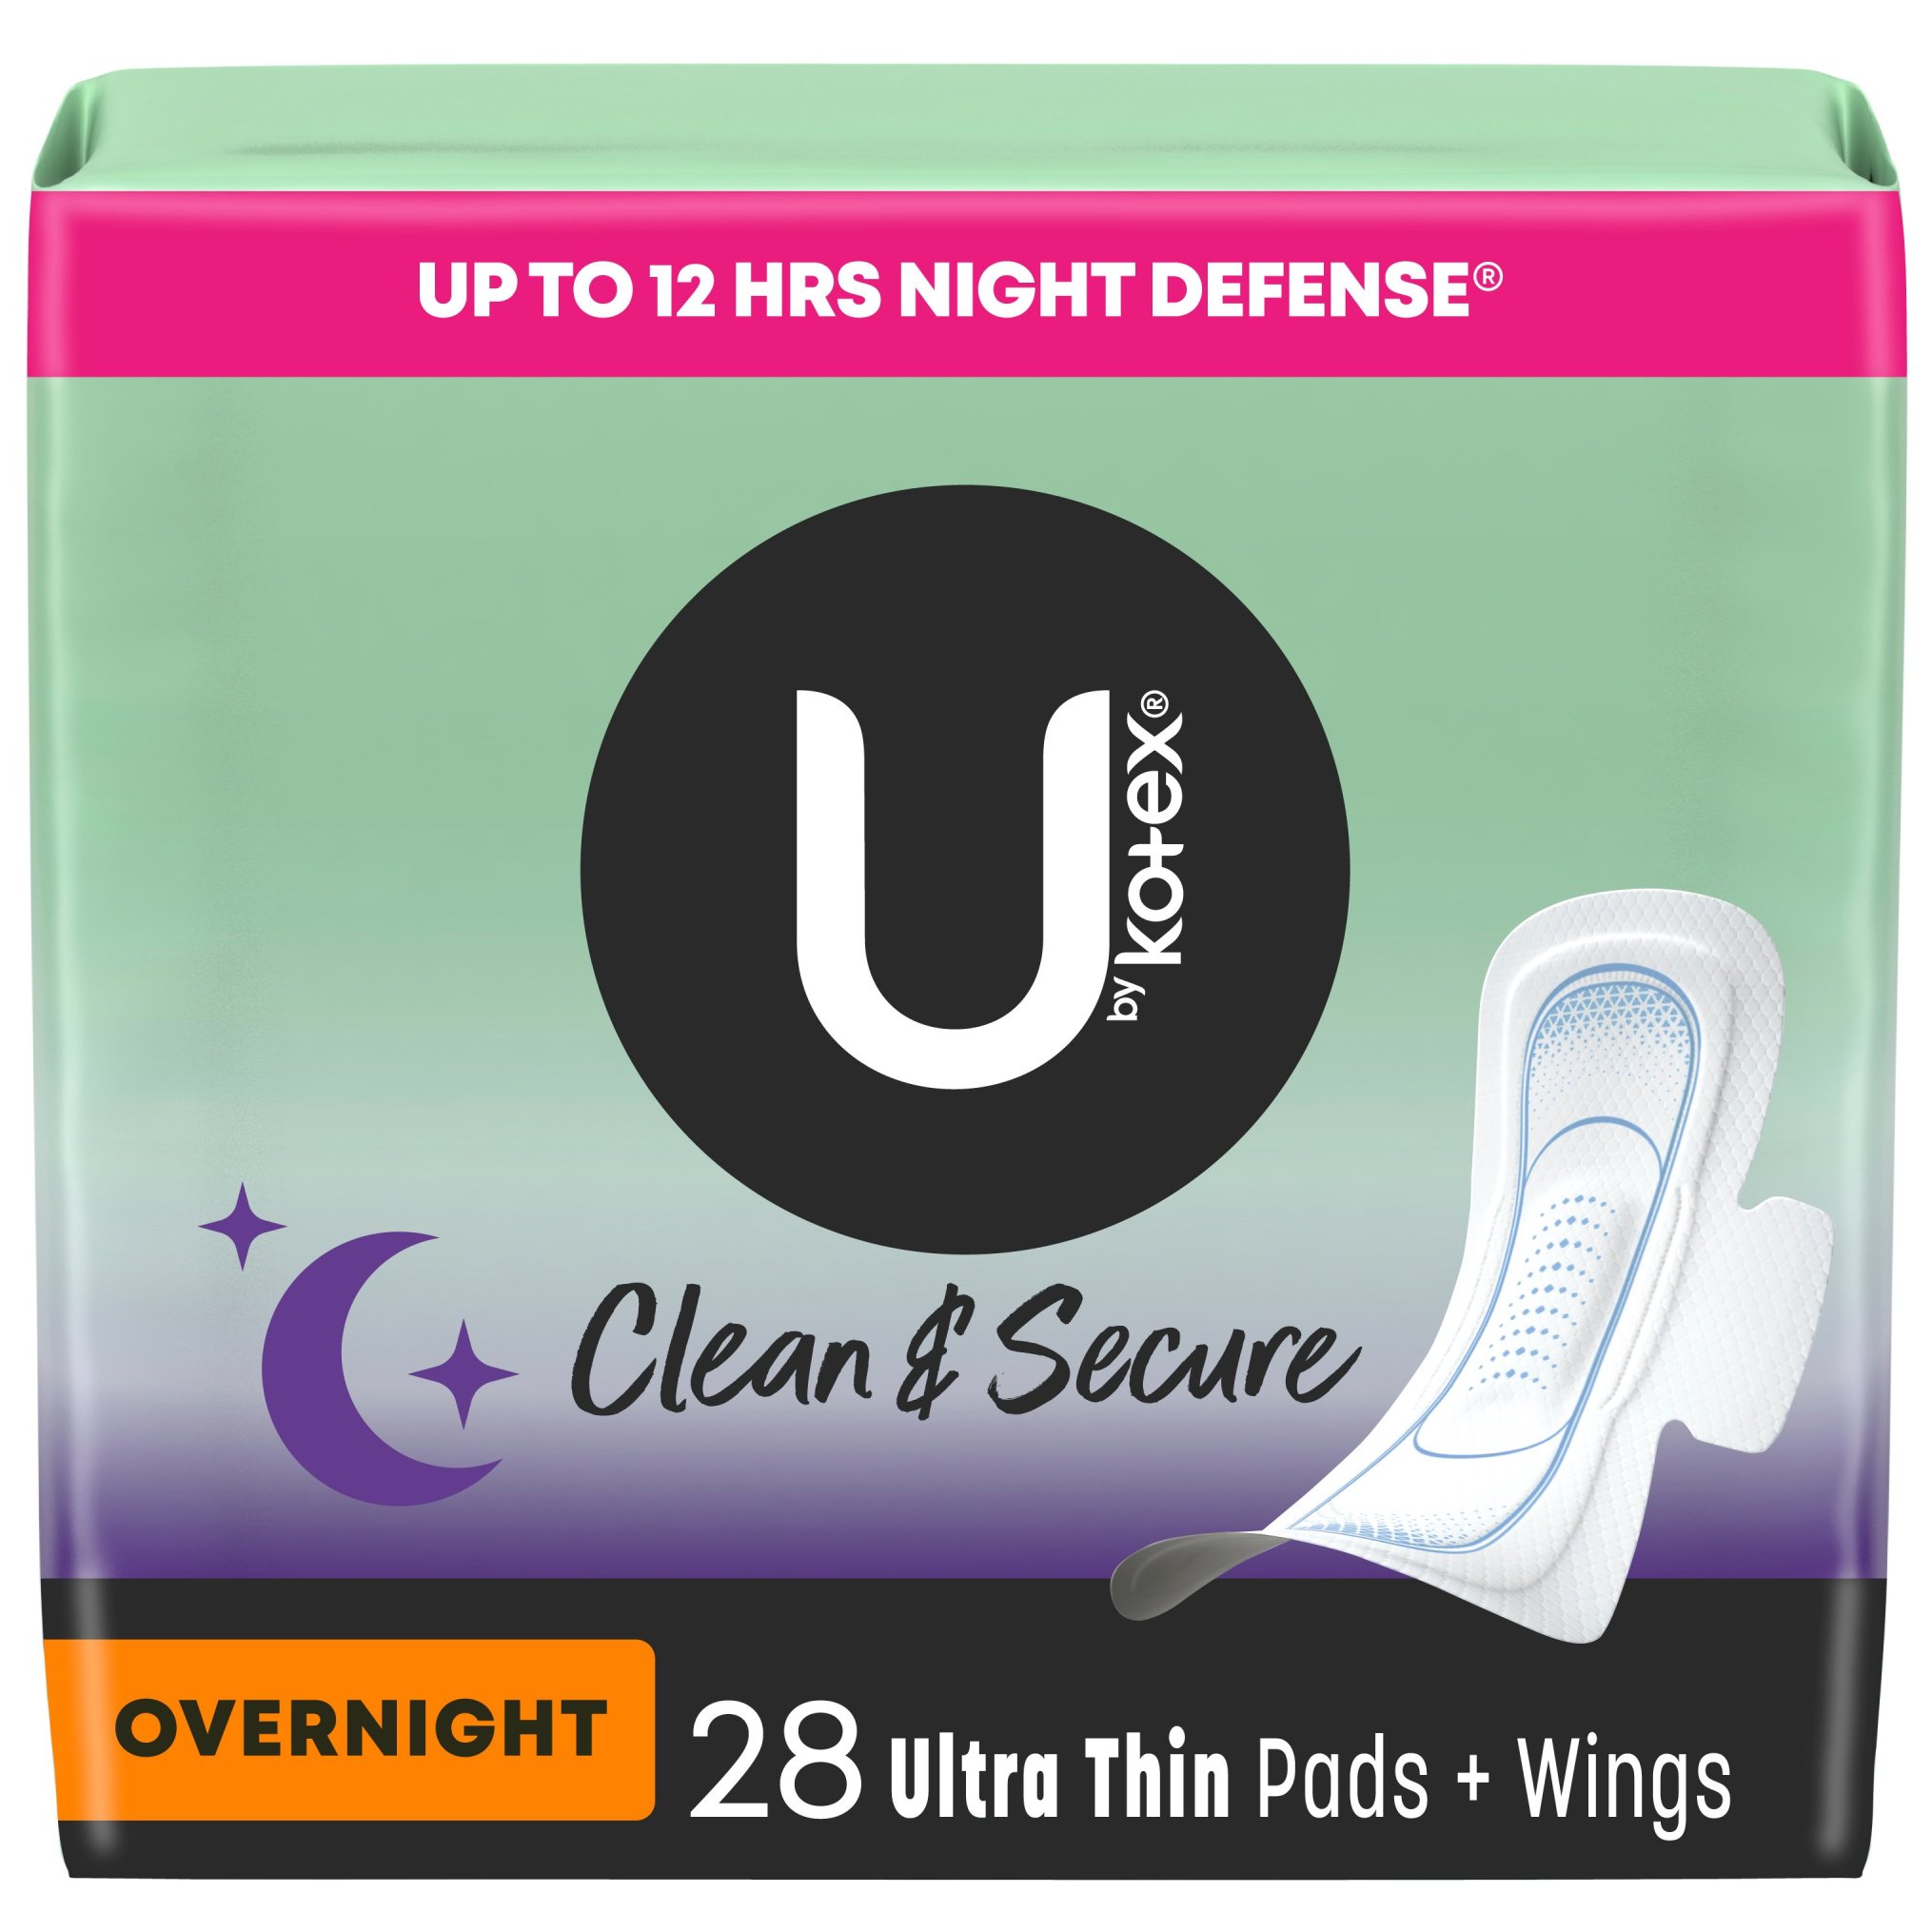 U by Kotex Security Ultra Thin Pads with Wings, Overnight, 28 CT